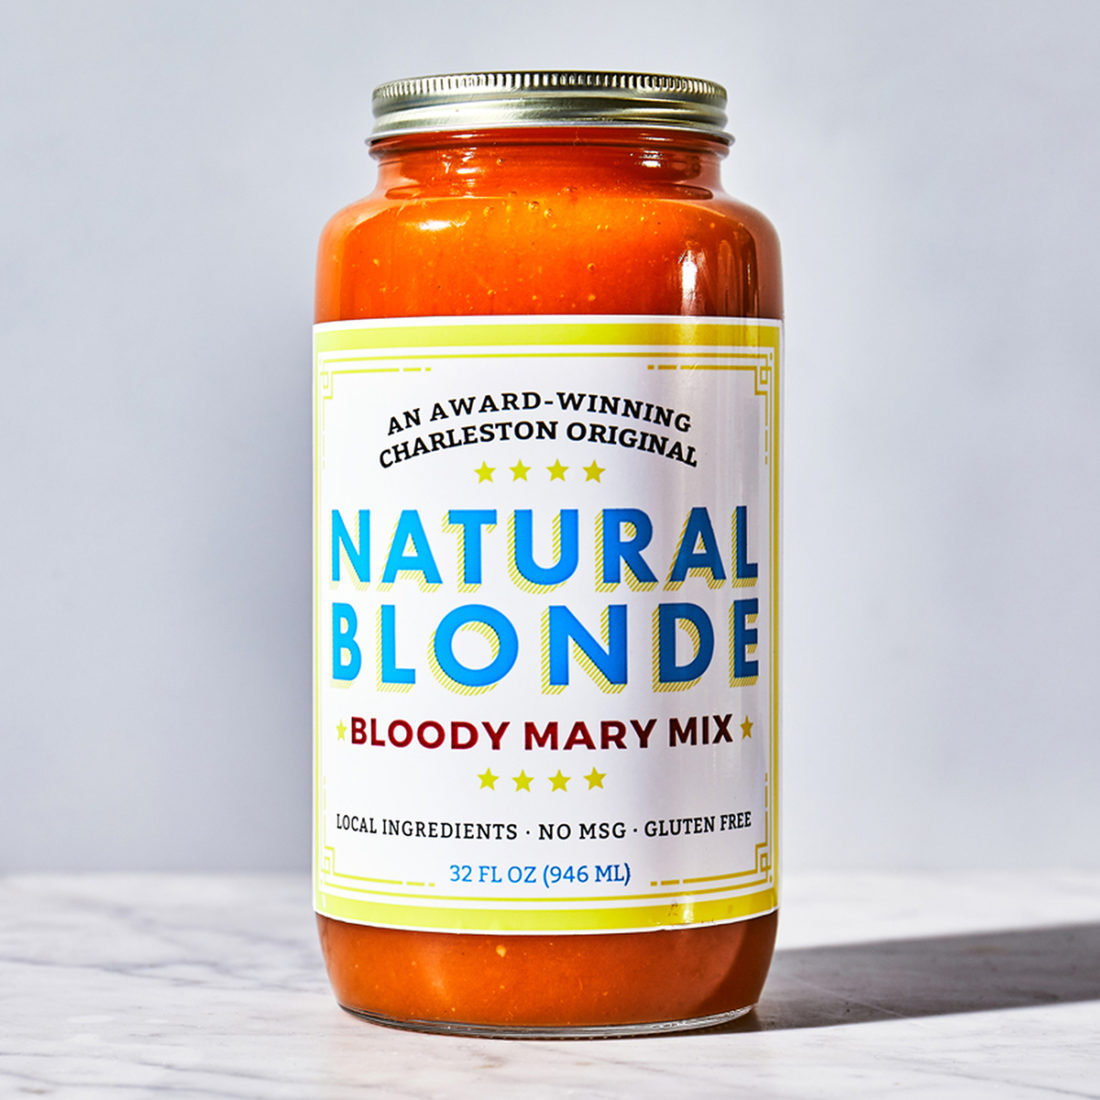 Bloody Mary Mix by Natural Blonde